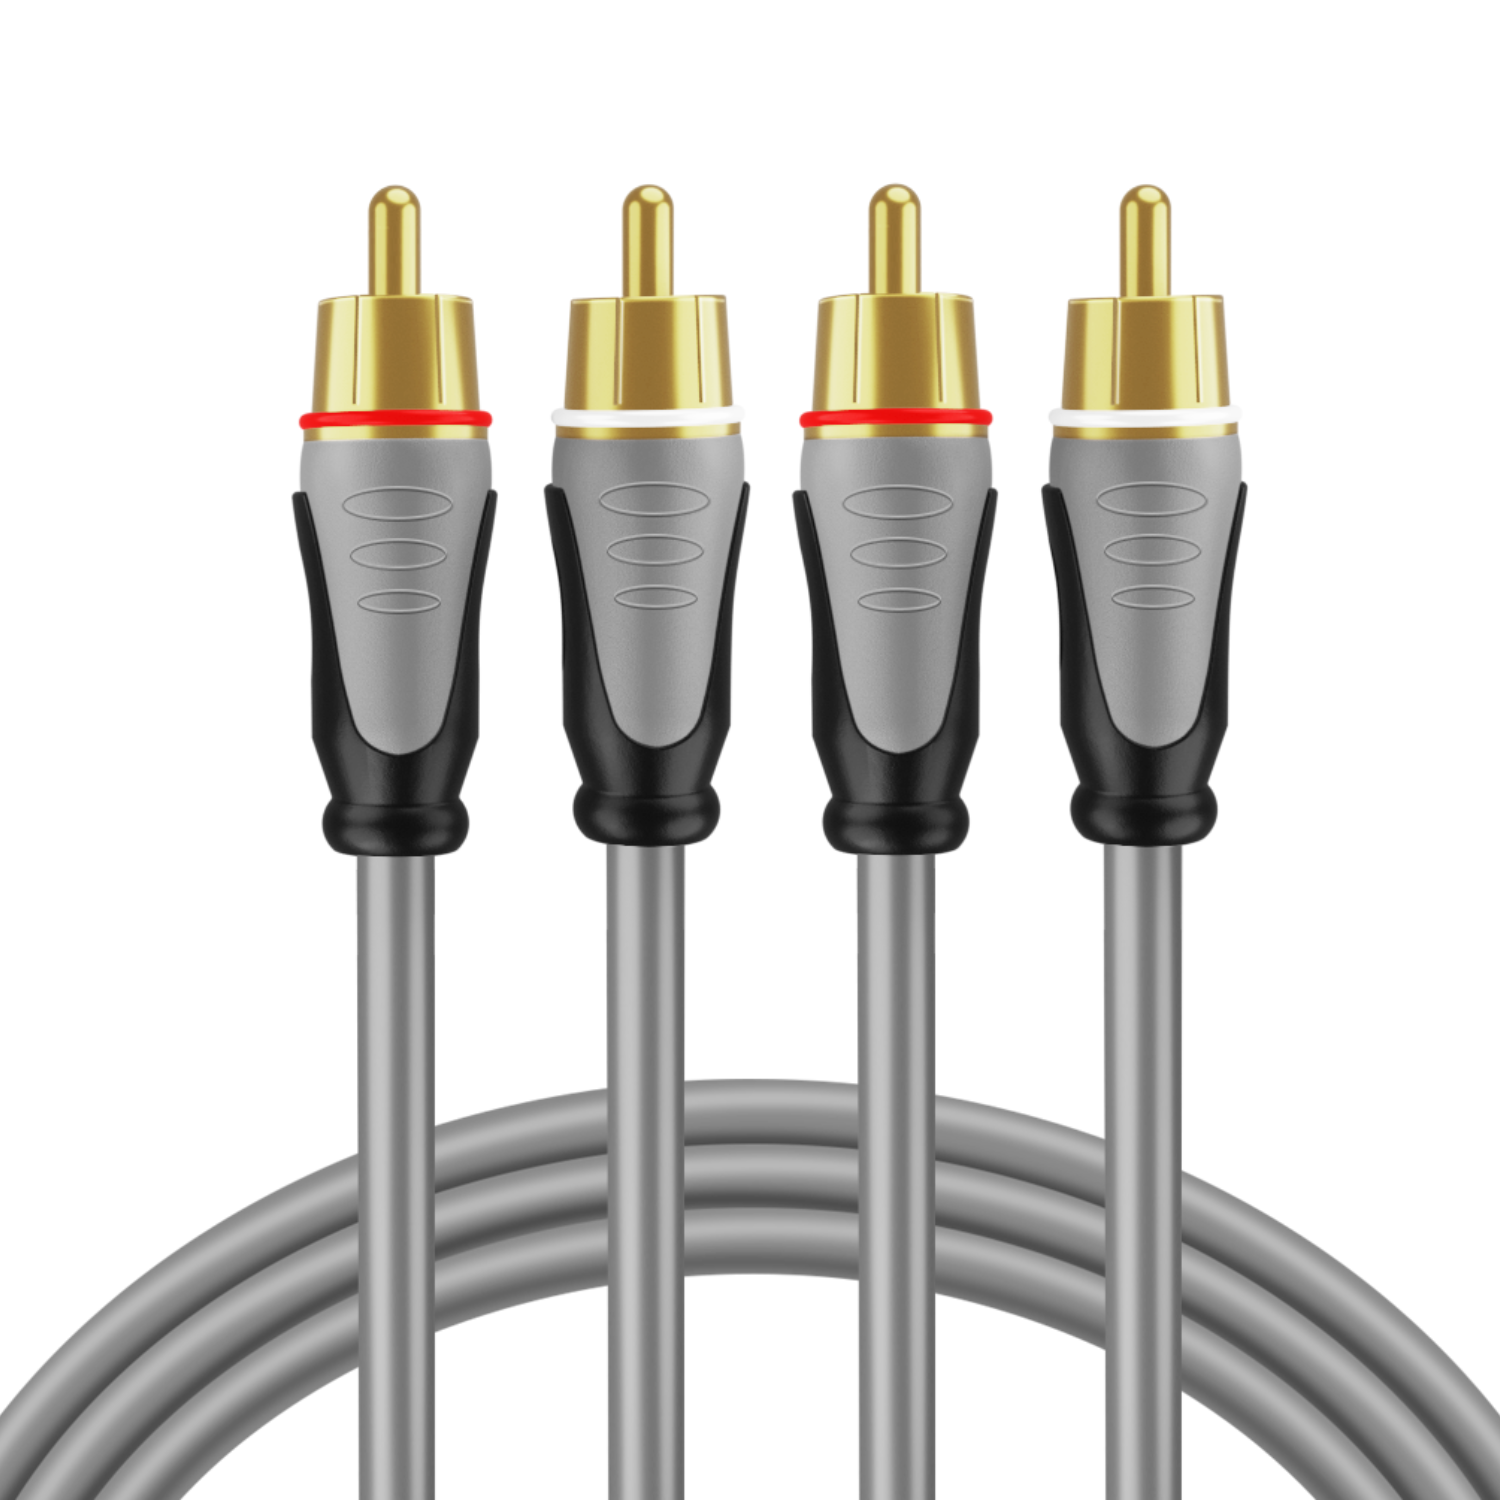 RCA Cable - 2RCA Male to 2RCA Male with Dual Shielded RCA Audio Cable - 2 Channel RCA Male to Male Stereo Connector, Gold Plated RCA Cables 6ft for Amplifiers, Car Audio, Home Theater, Speakers - image 2 of 6